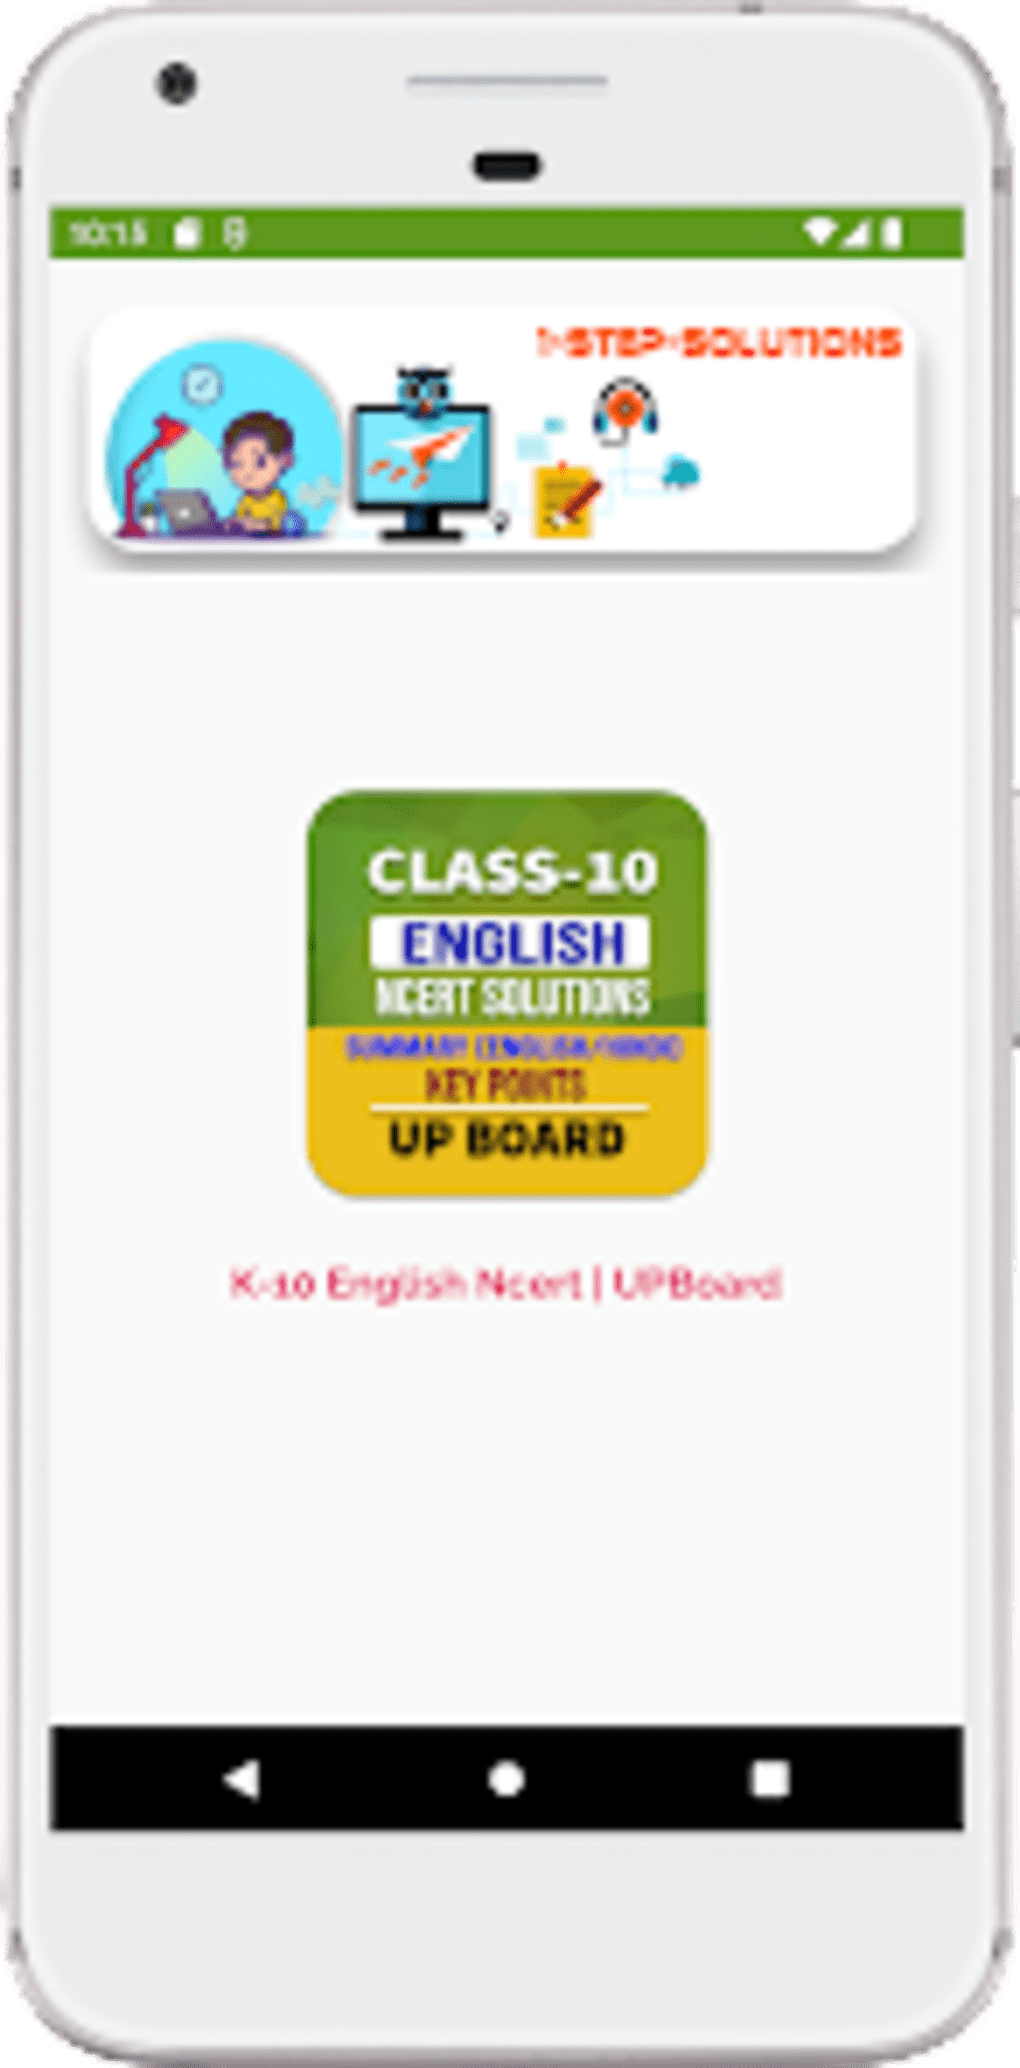 10th-class-english-upboard-for-android